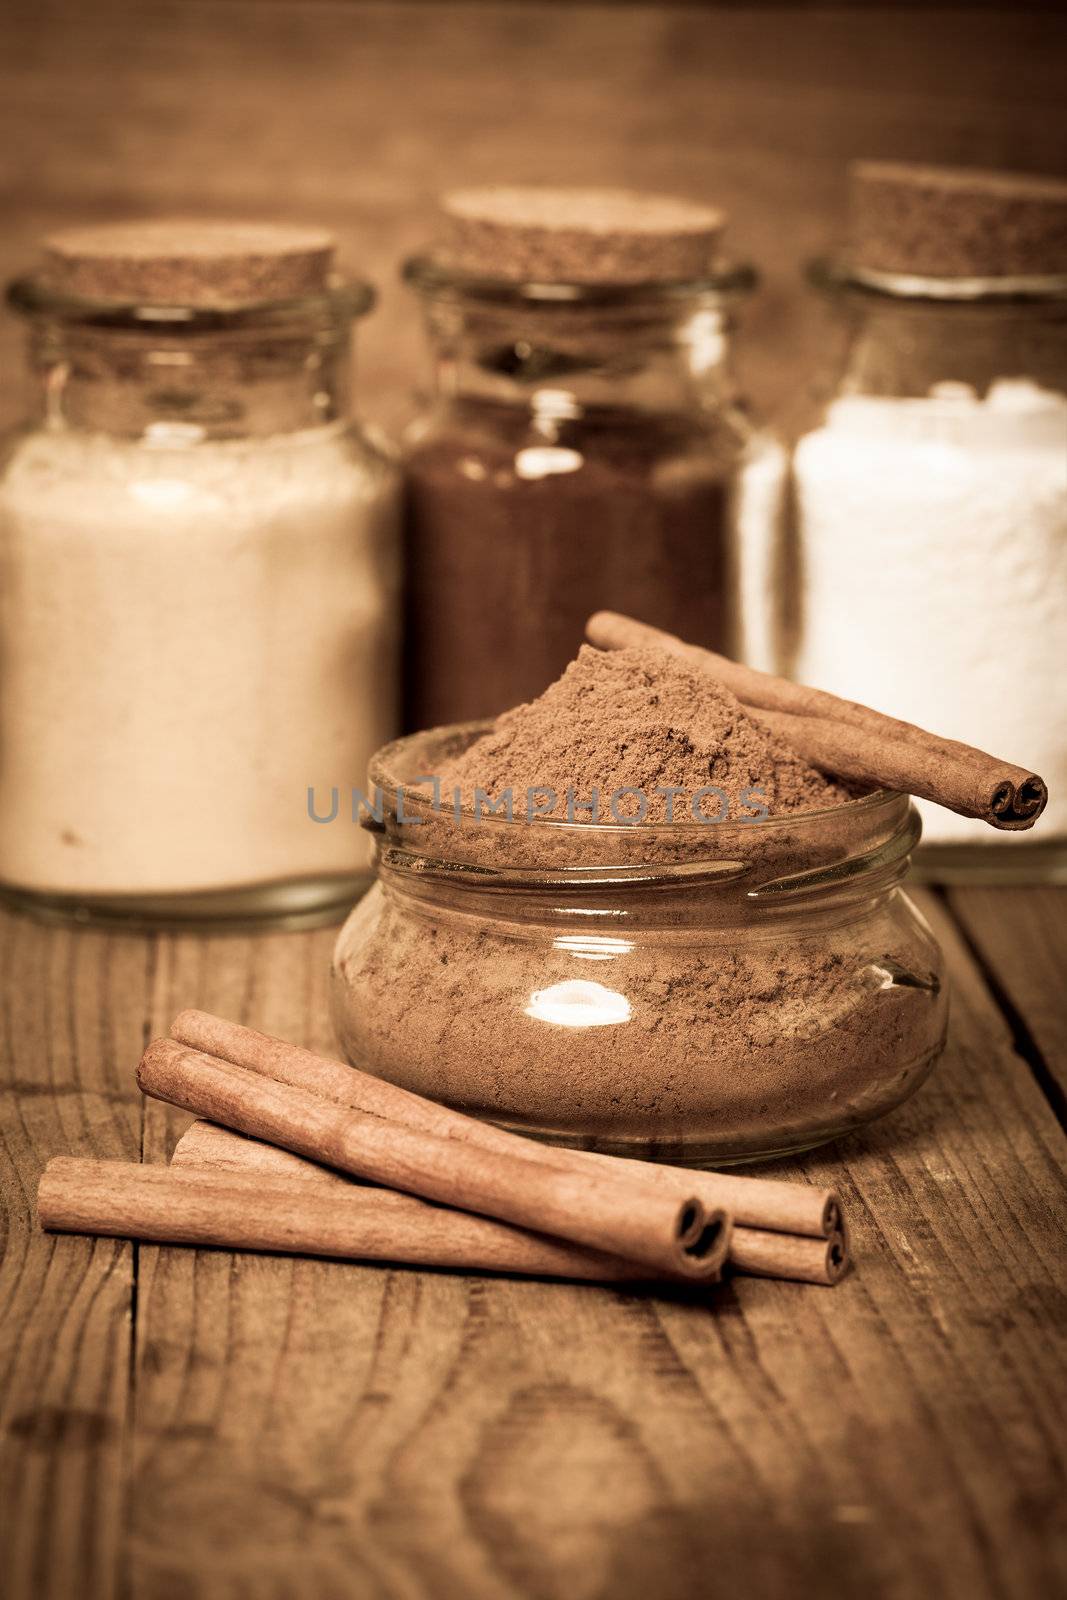 cinnamon, or chinese cinnamon in the transparent glass jar with Cinnamon sticks, on wooden table